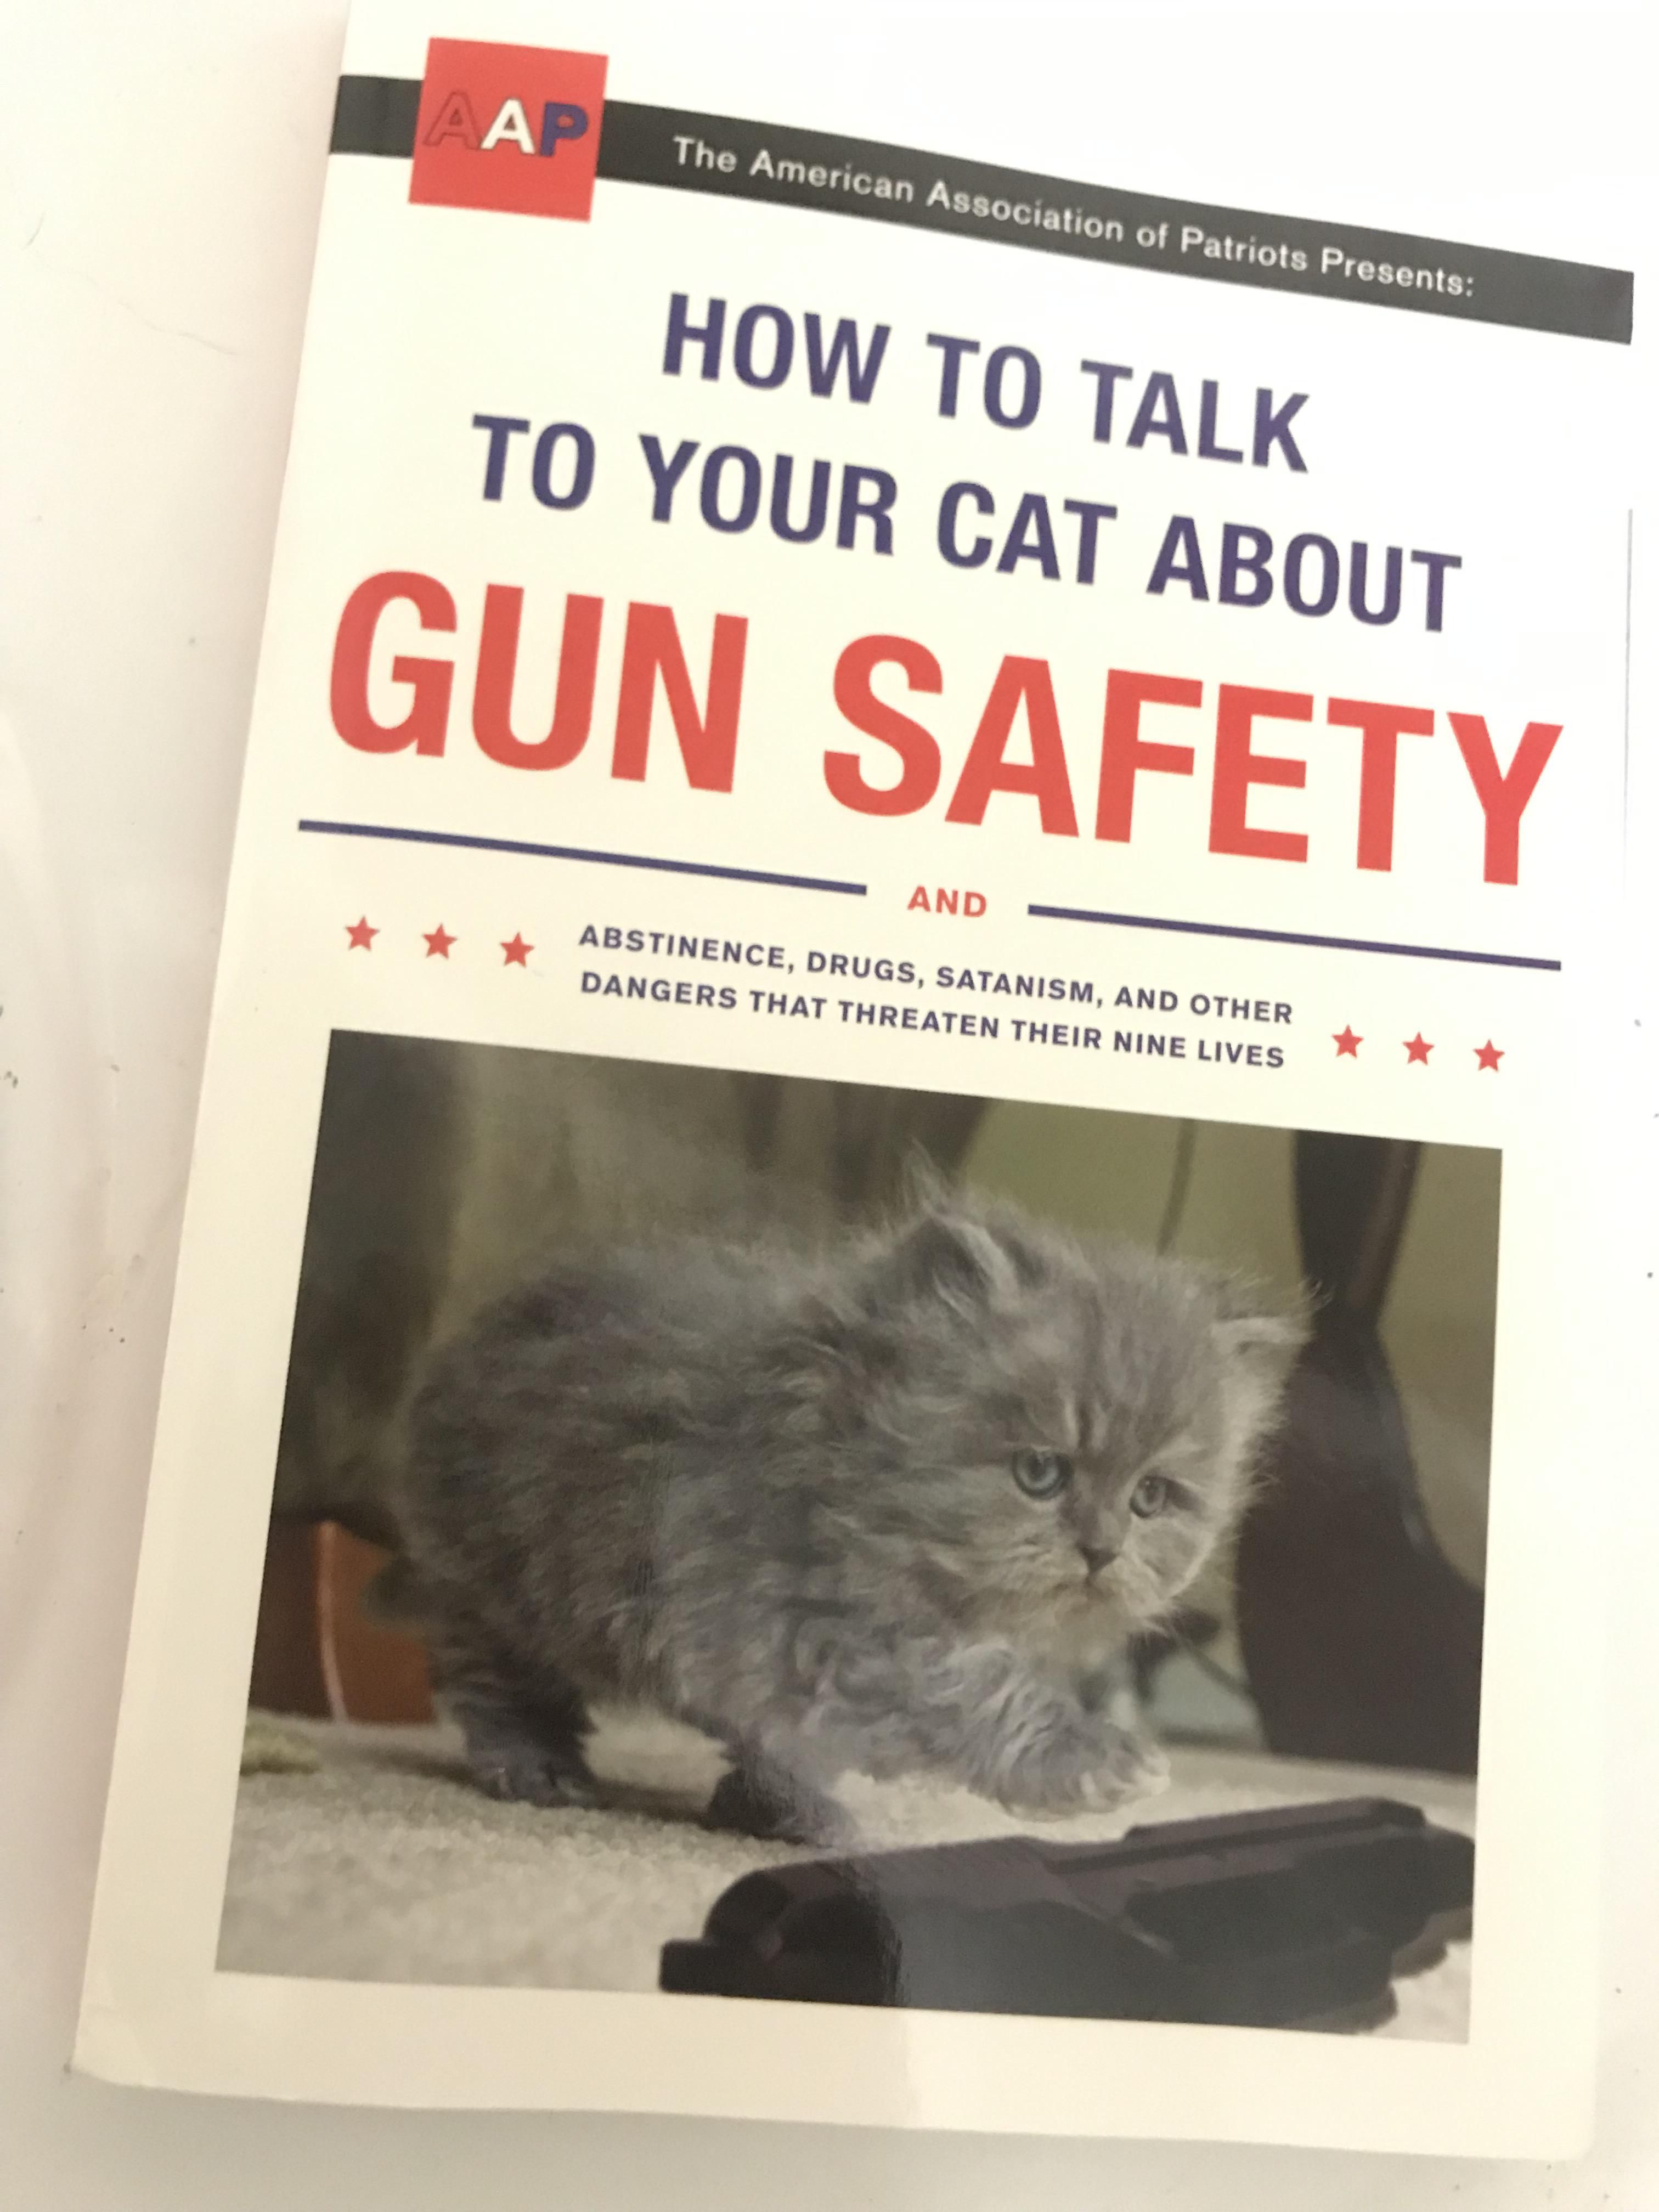 My neighbors are moving to Seattle tomorrow. We both like cats. They left me this book as a farewell present today.